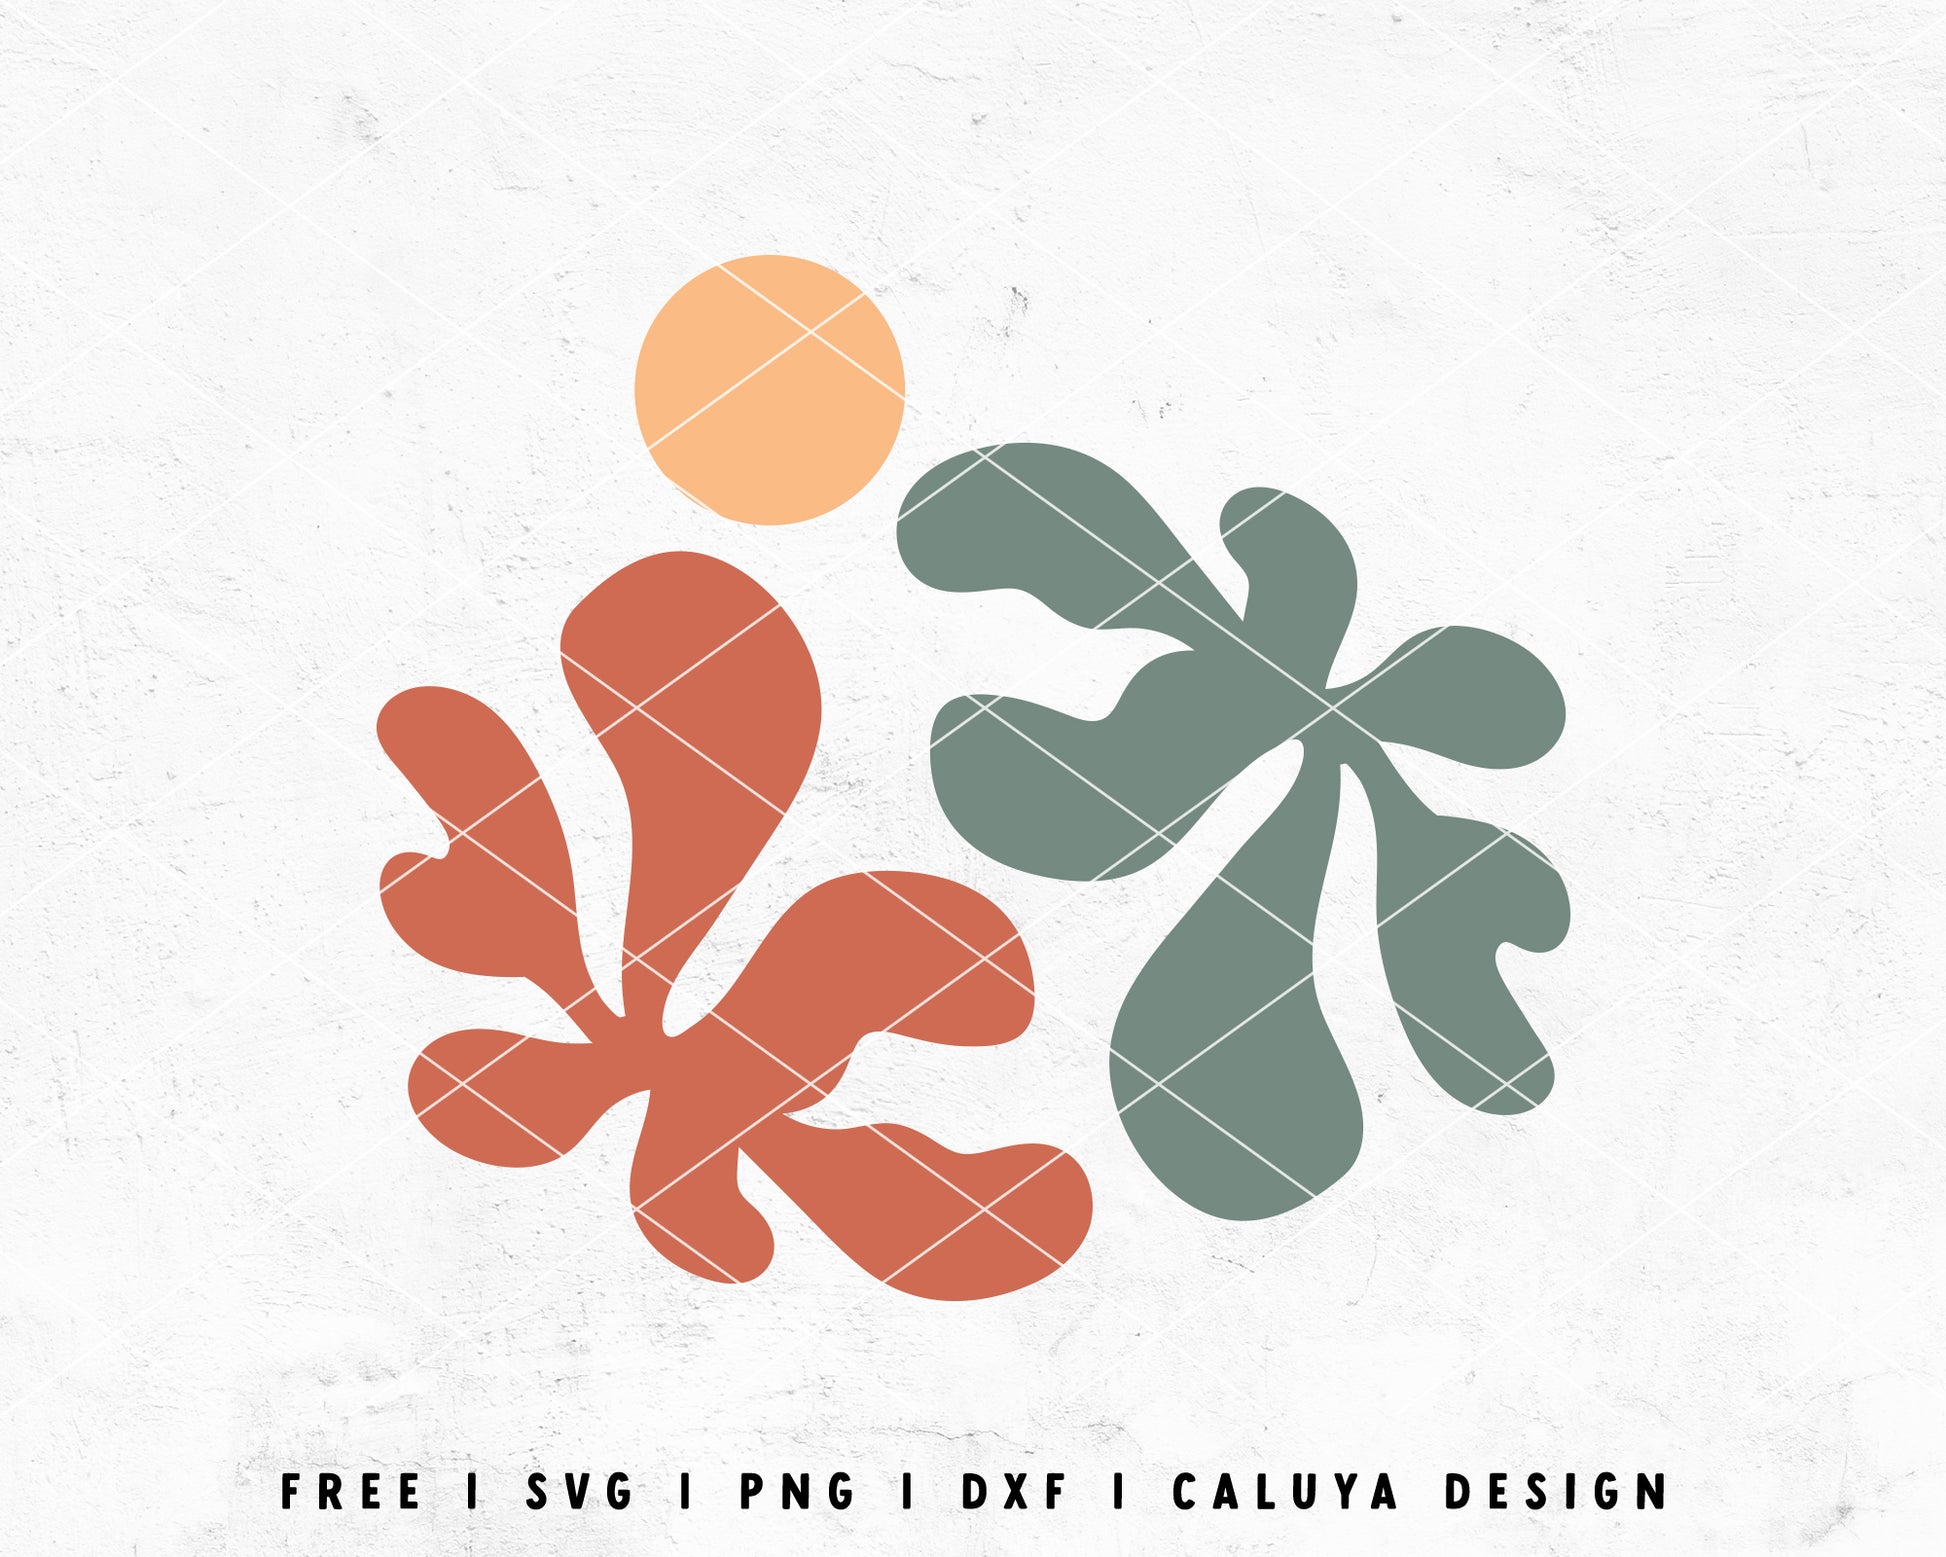 FREE Matisse Inspired Flower SVG | Abstract Boho Element SVG Cut File for Cricut, Cameo Silhouette | Free SVG Cut File